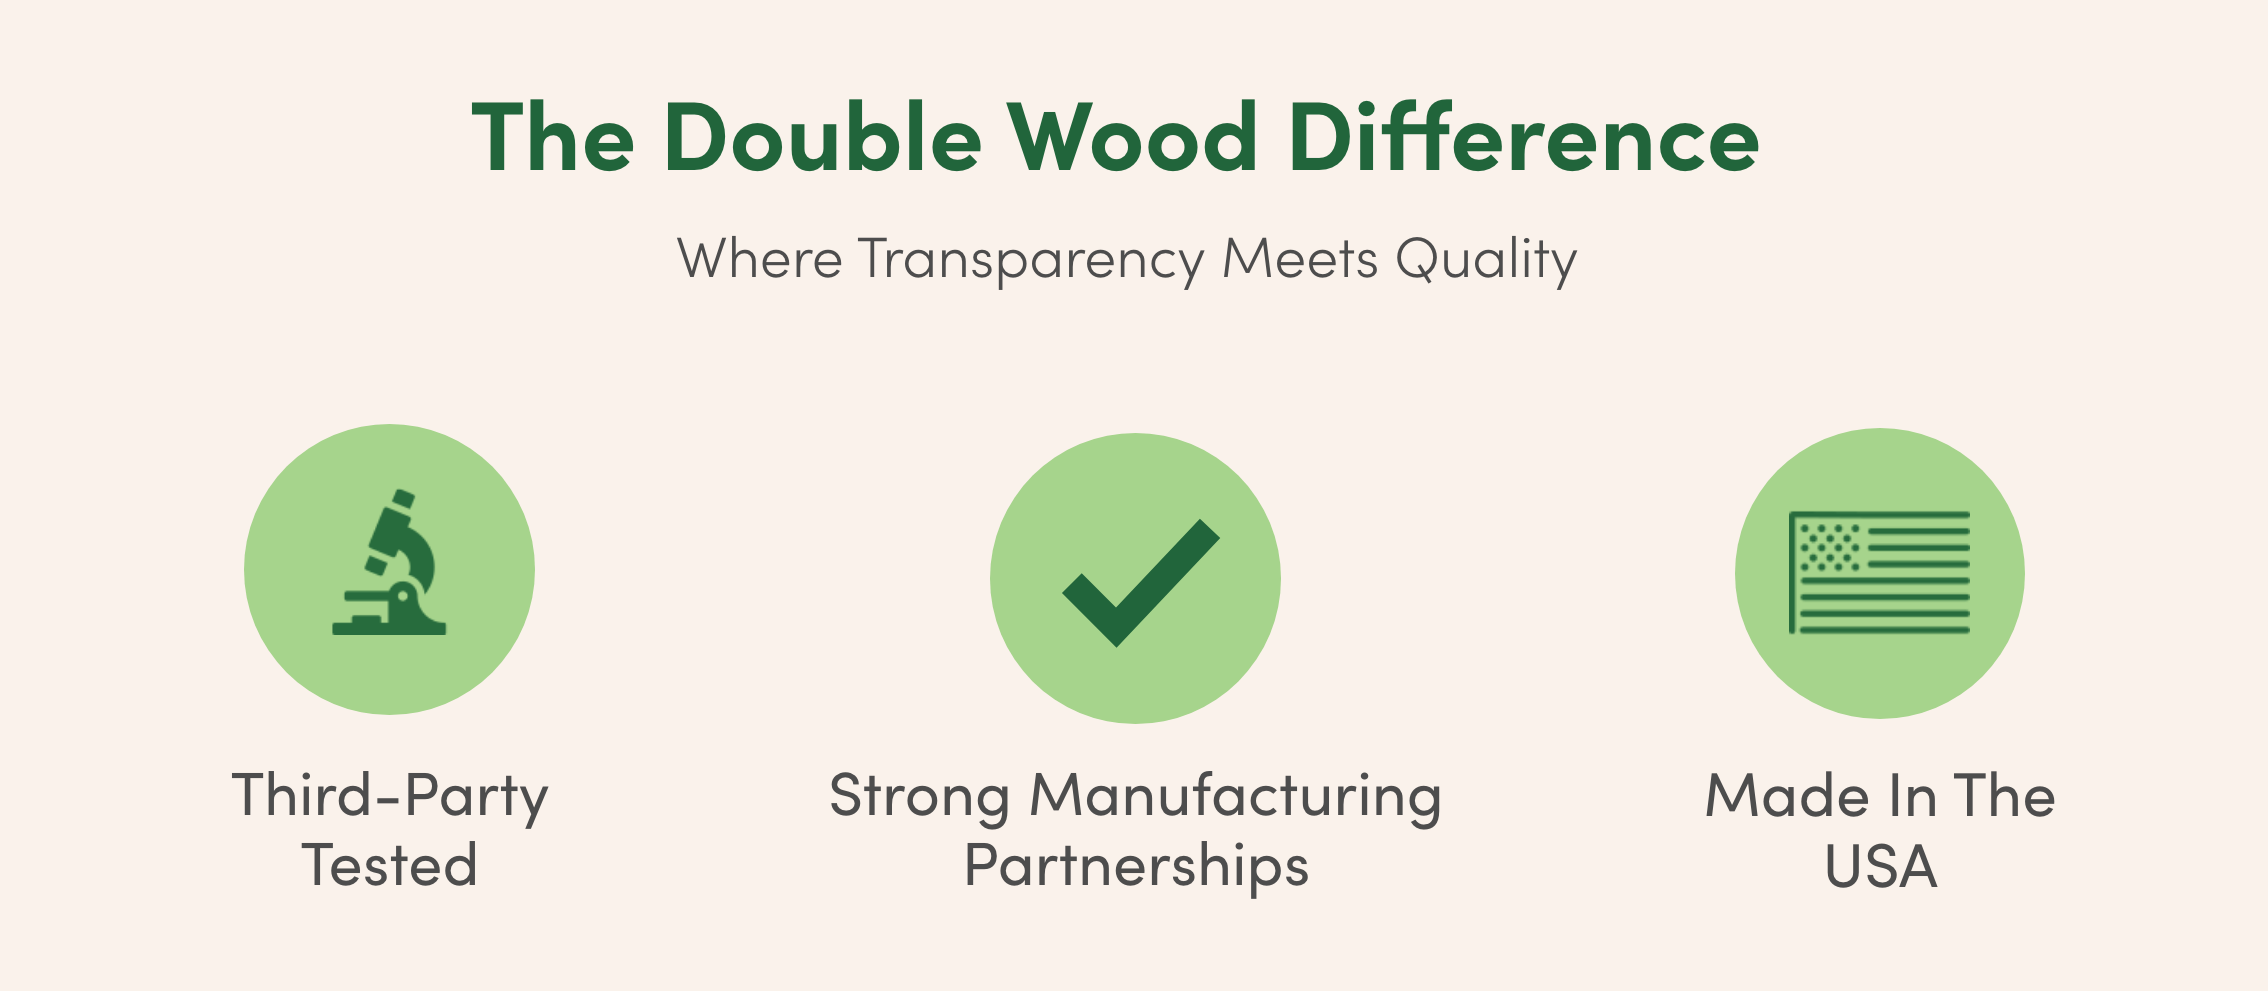 The Double Wood Difference